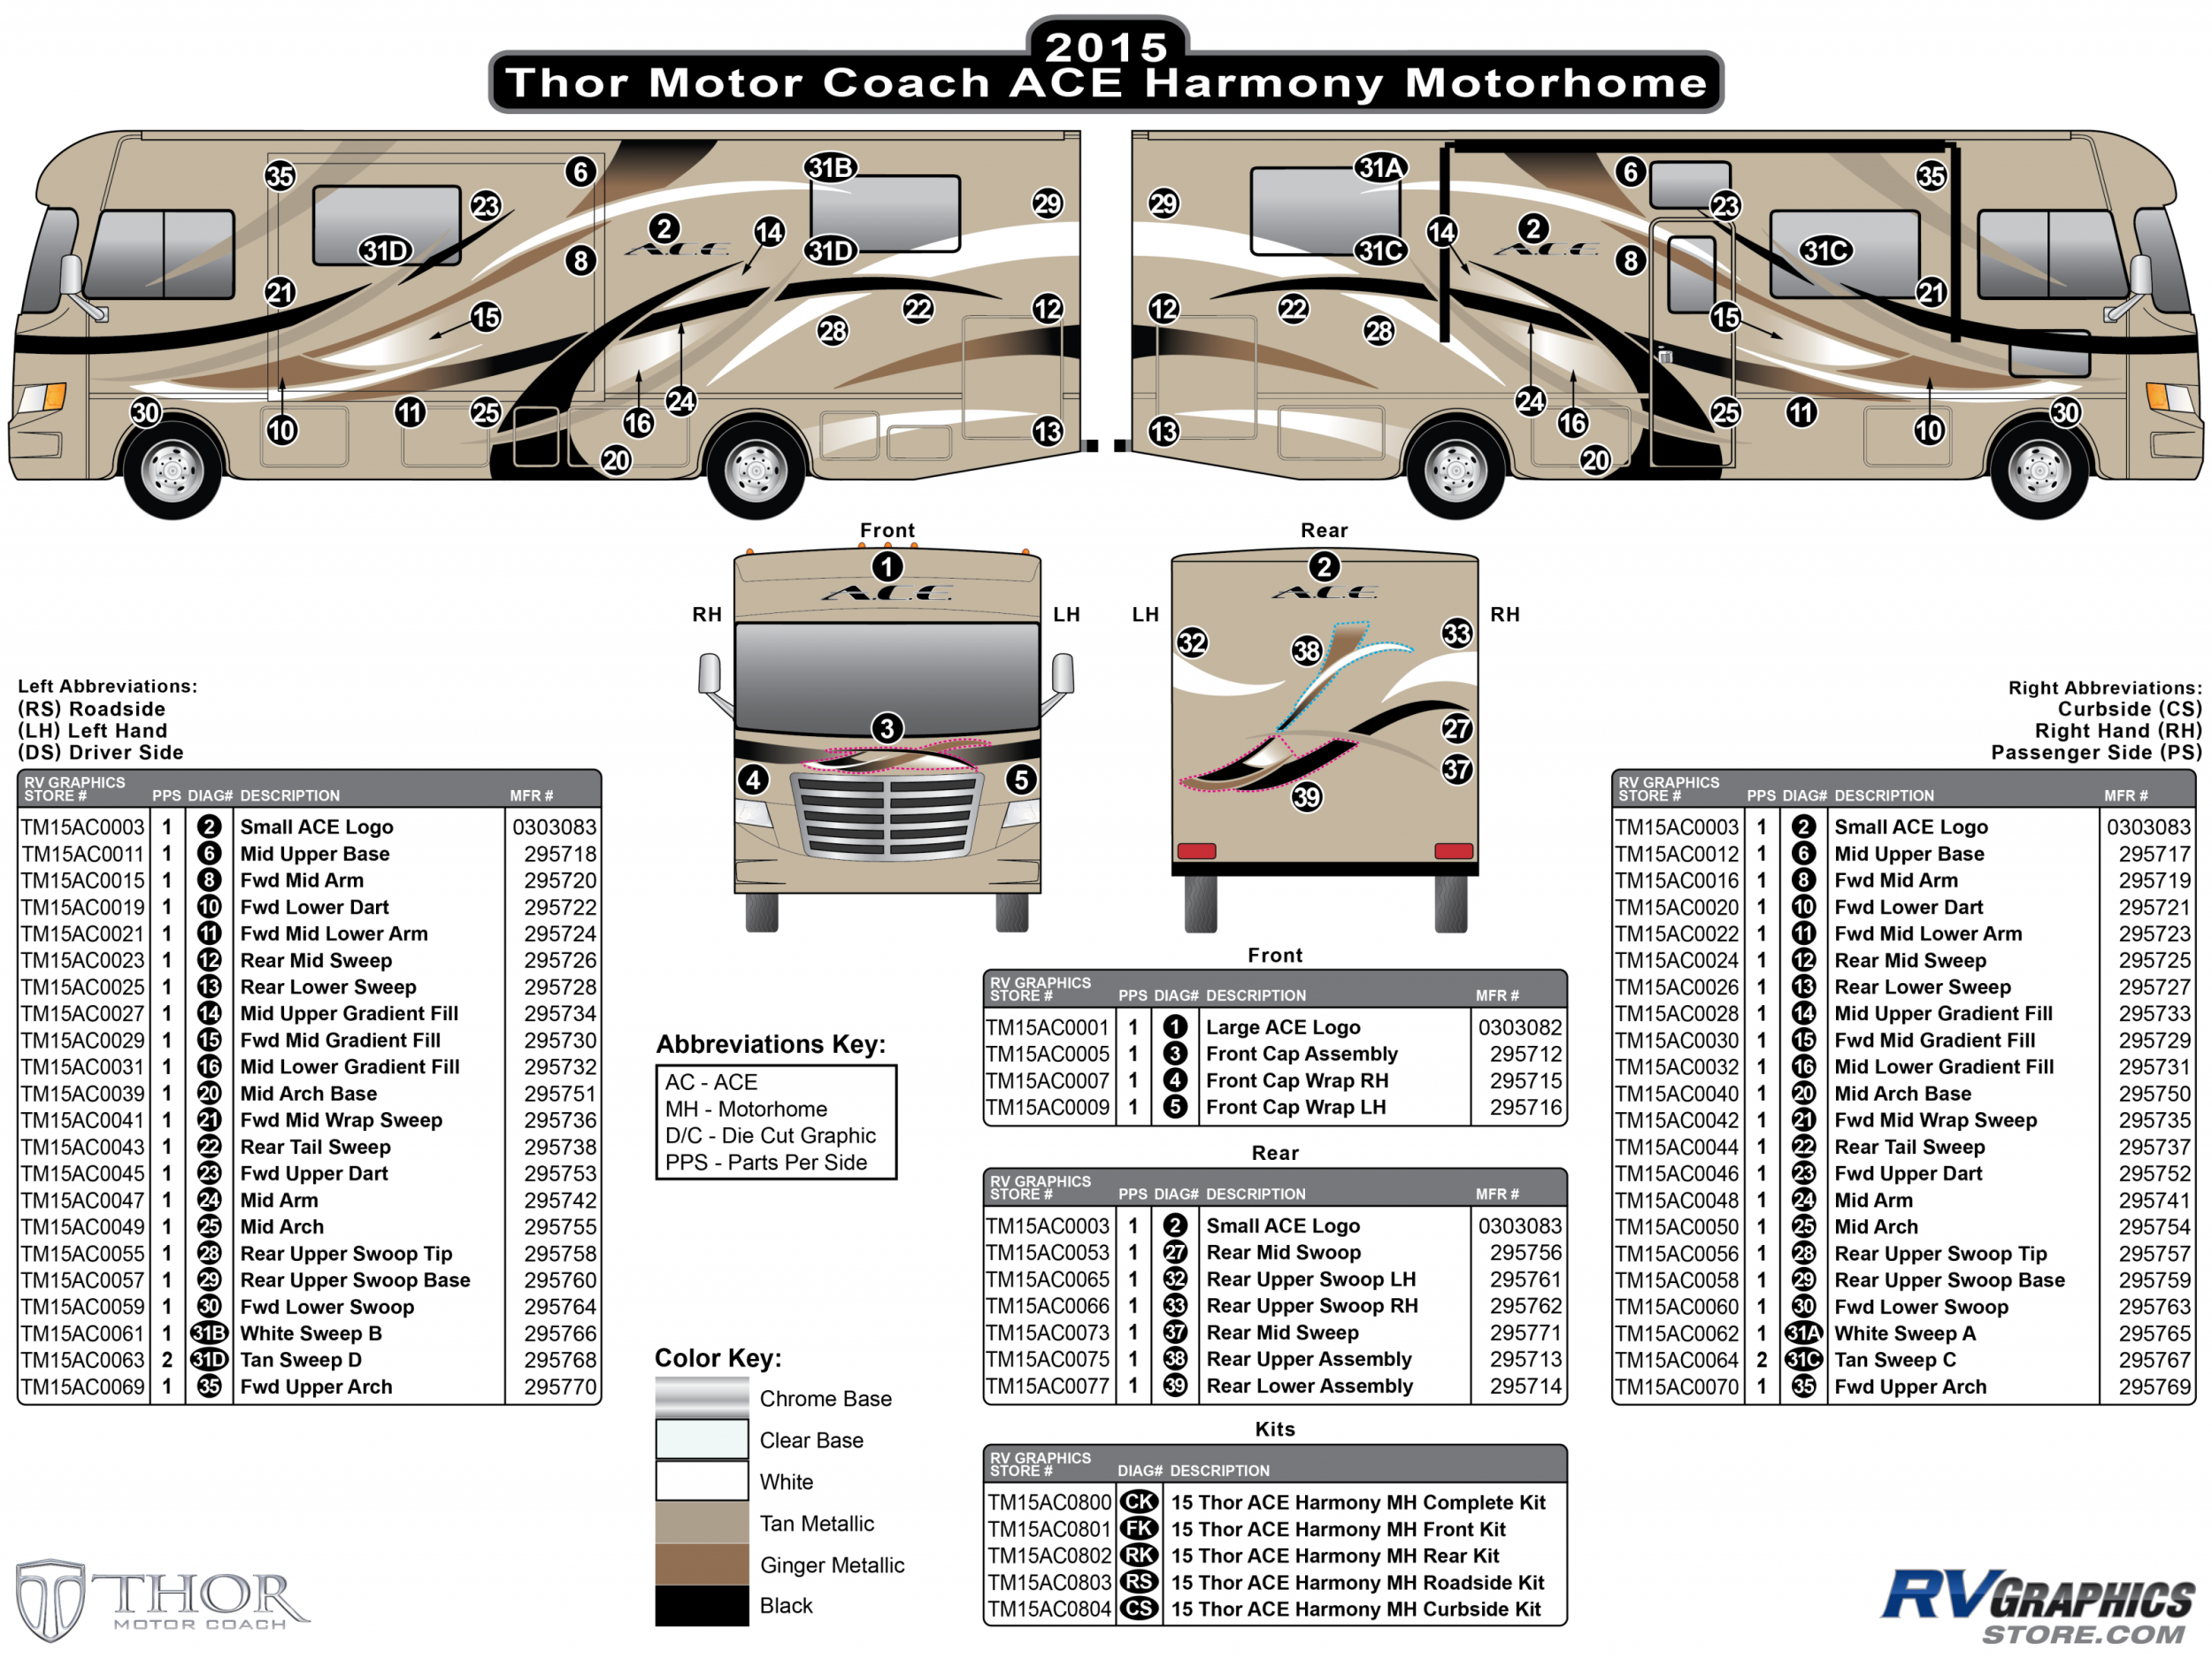 ACE - 2015-2017 ACE MH-Motorhome Harmony (Gold) Version